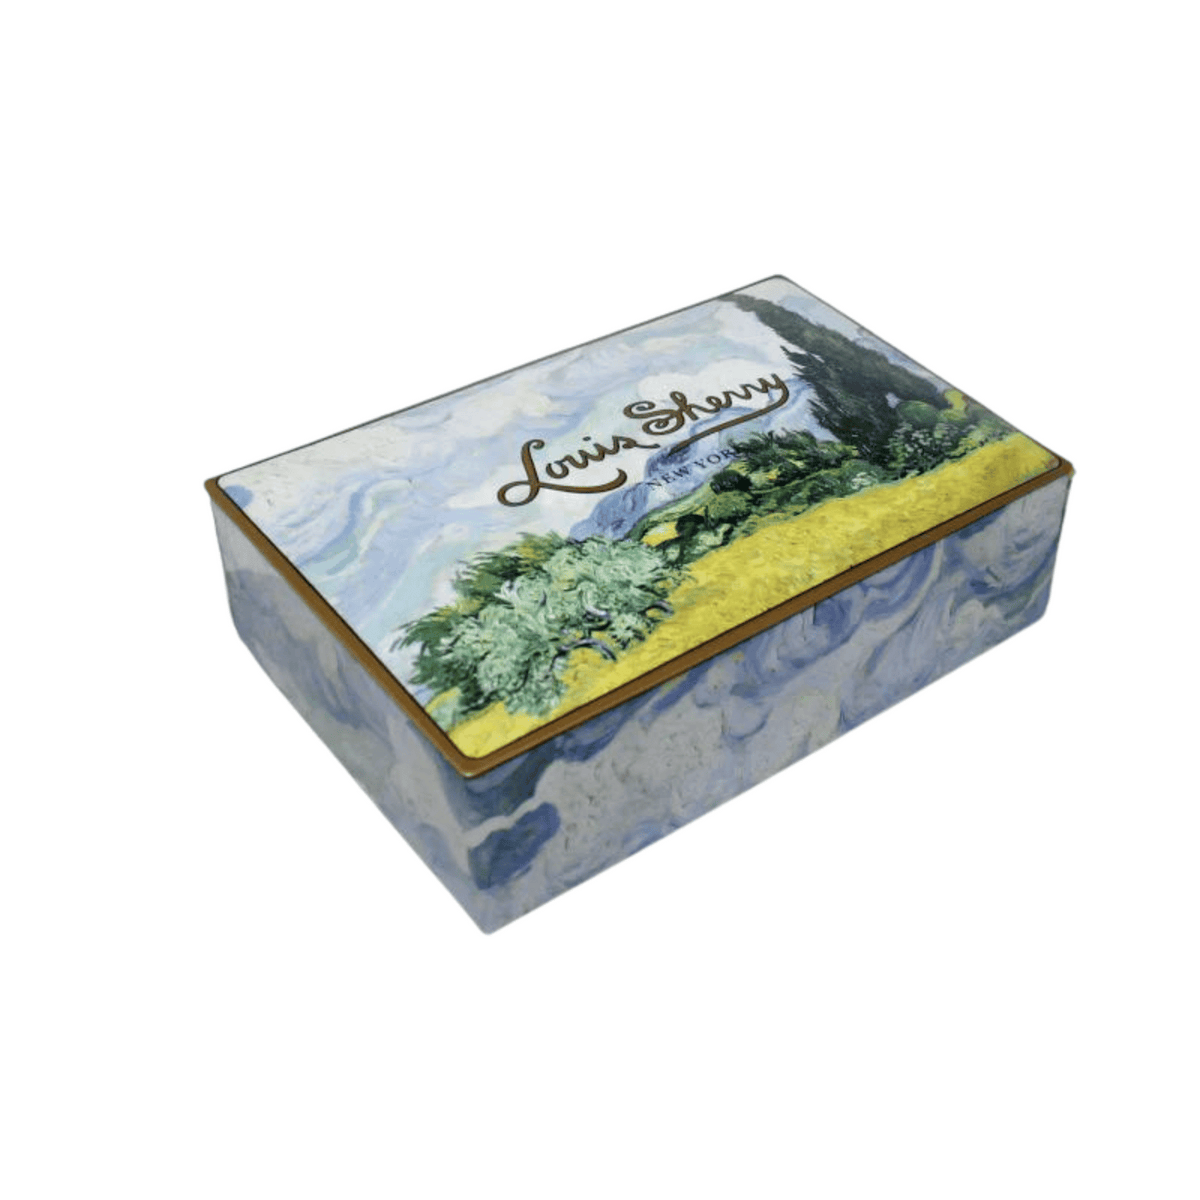 Primary Image of Wheat Field by Van Gogh Chocolate Tin